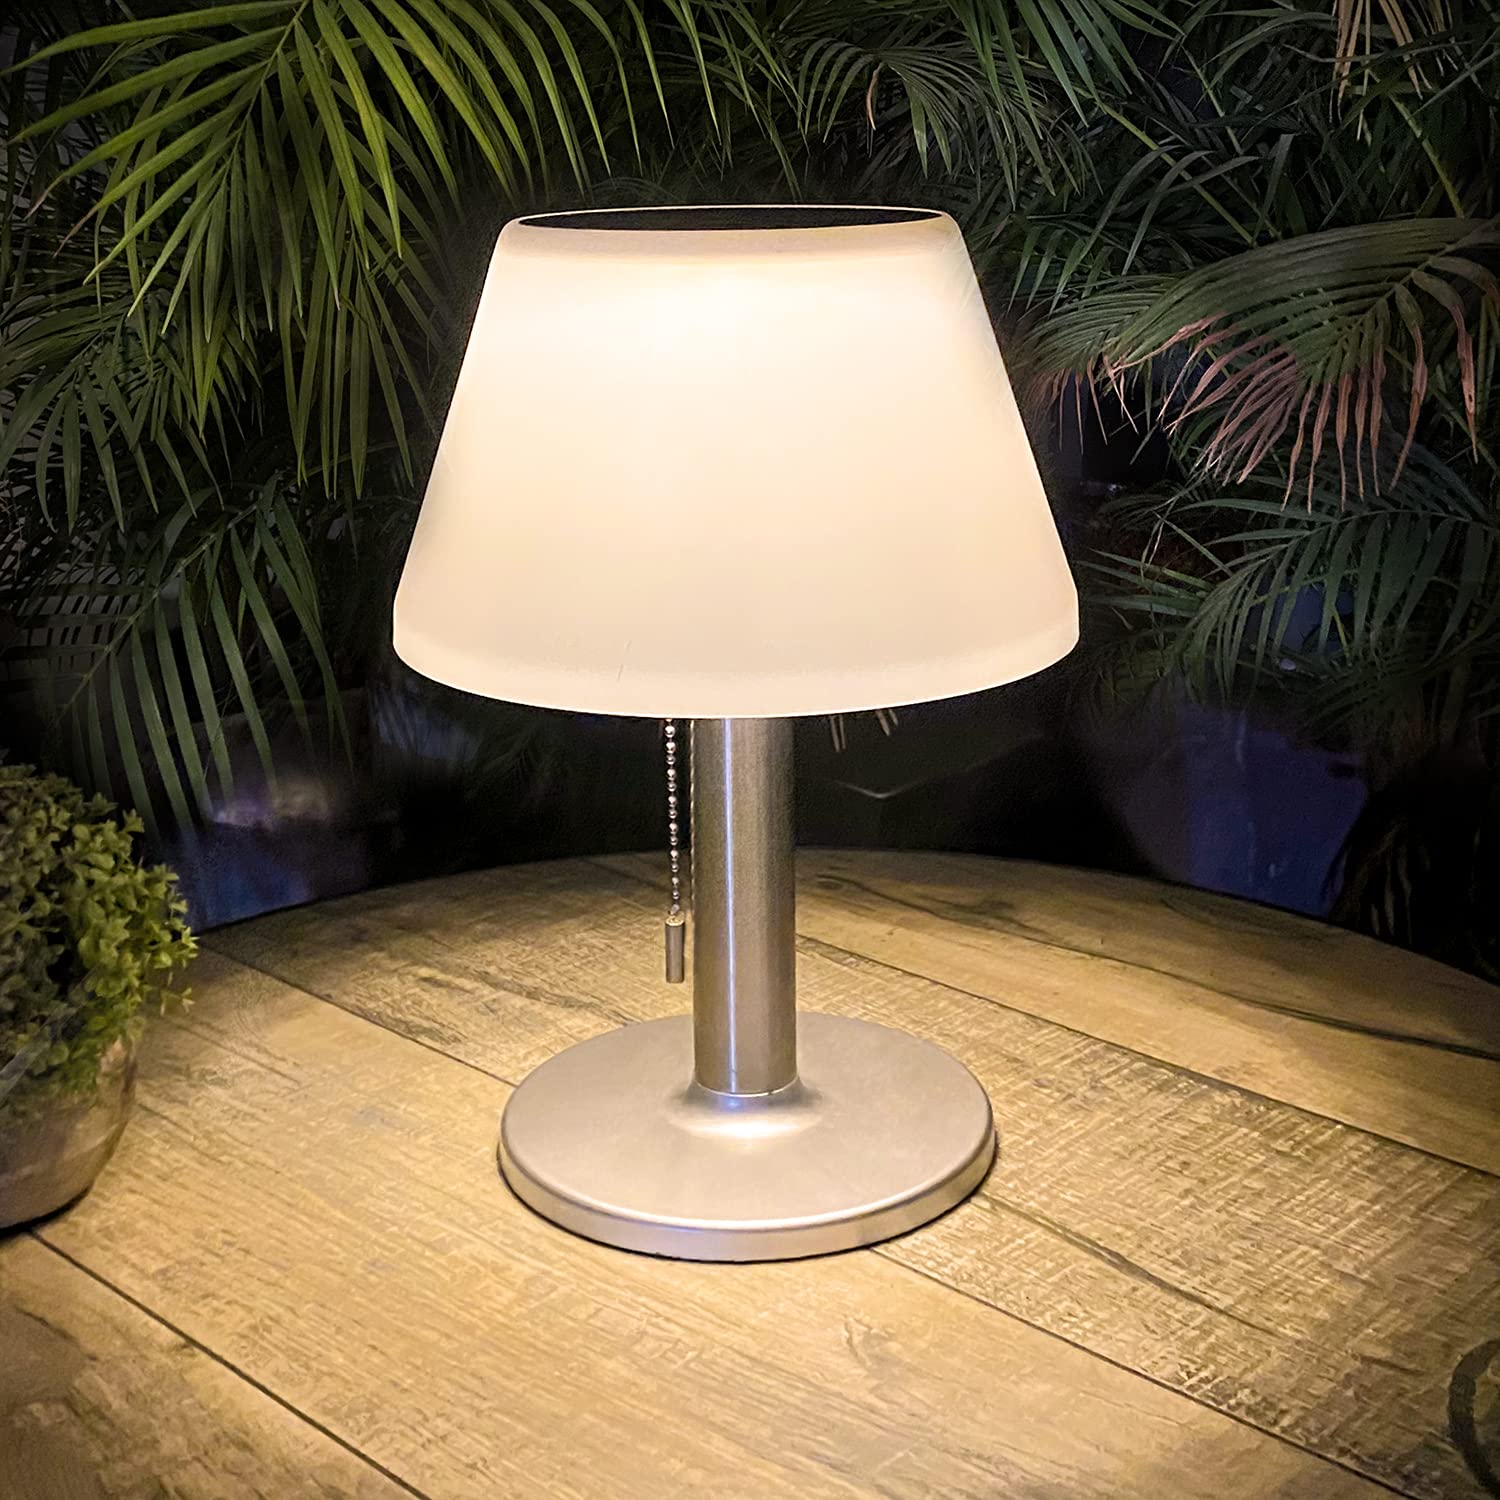 Stylish Table Lamps